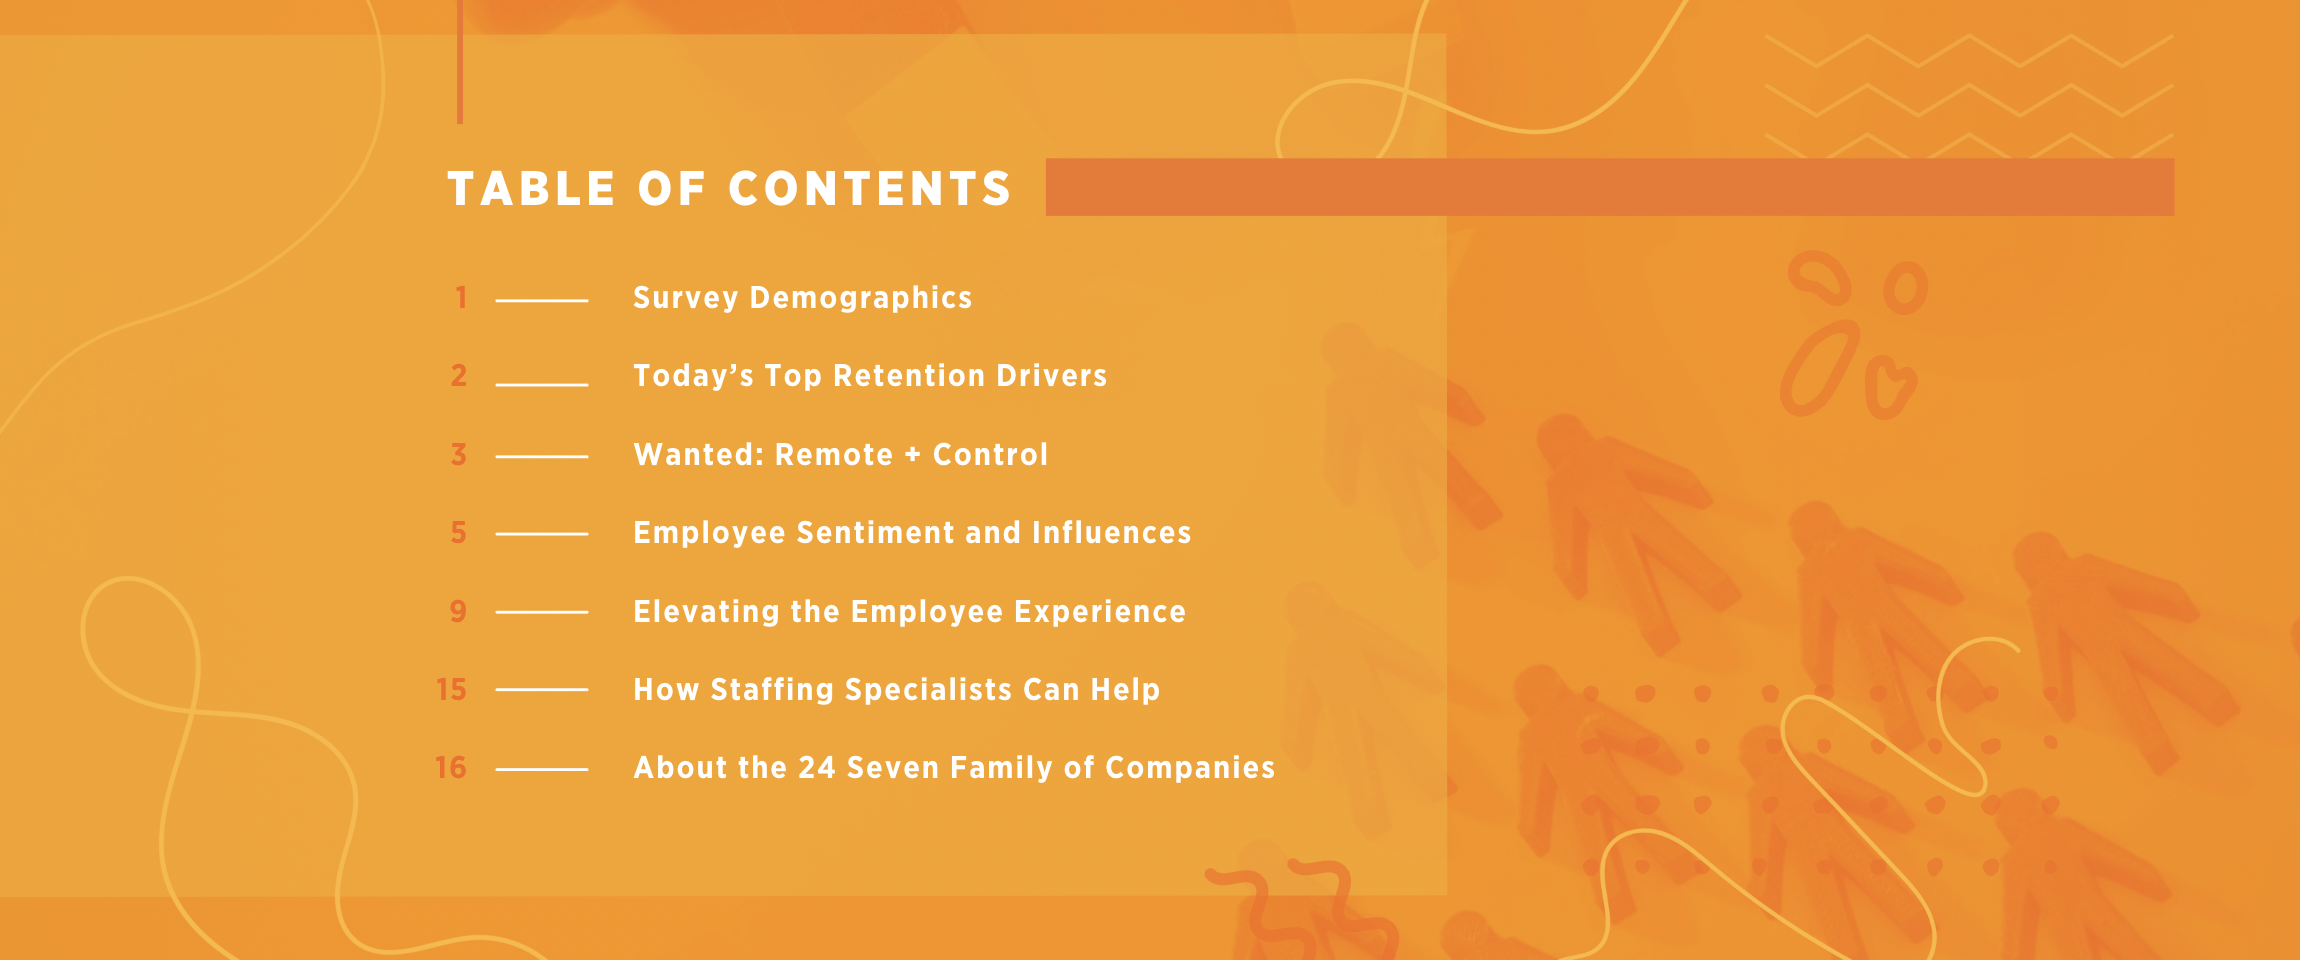 Talent Retention Report: Table of Contents